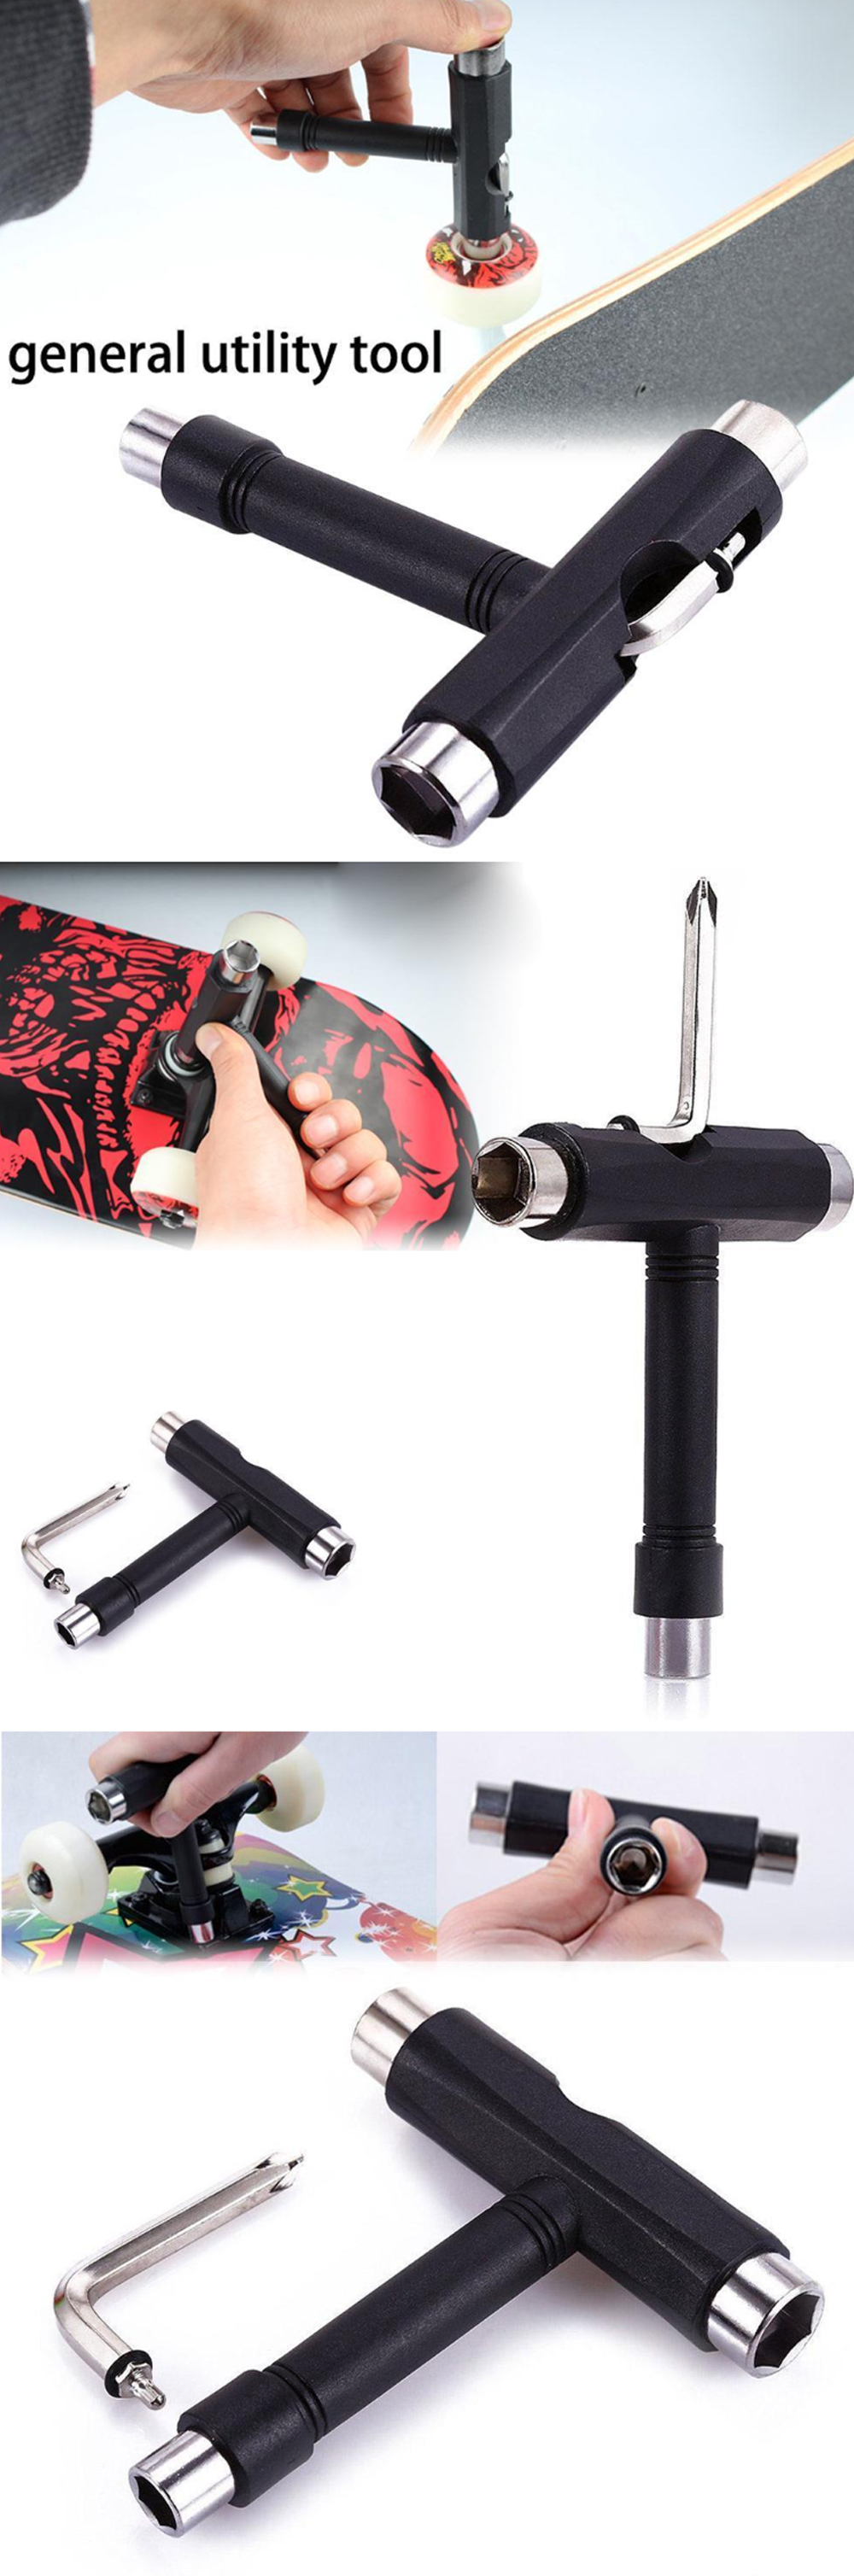 Multi-Function-Skateboard-Tools-T-Tools-Allen-Key-L-Type-Phillips-Head-Wrench-Screwdriver-for-Adjust-1840495-1